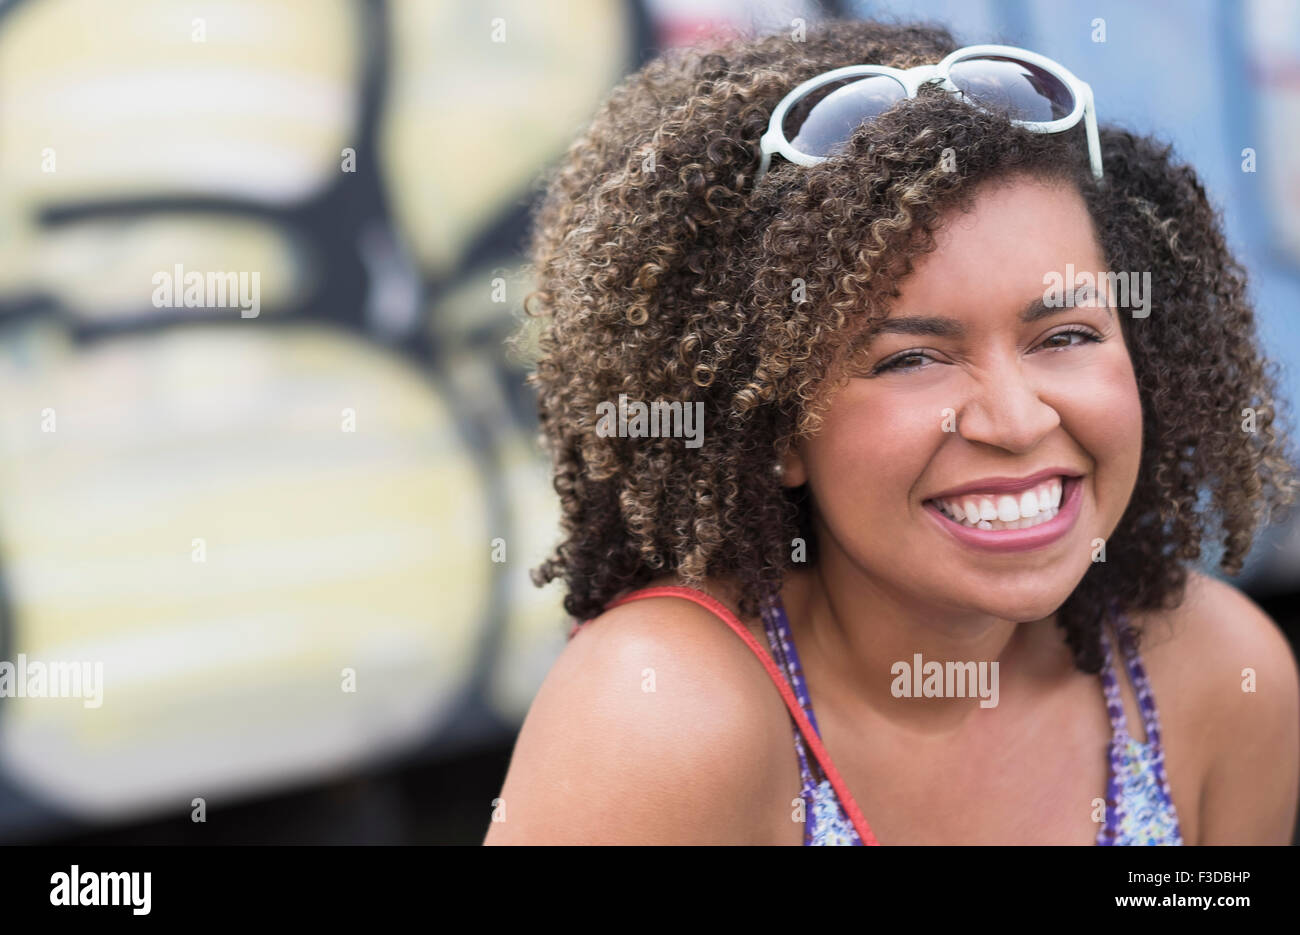 Portrait of smiling young woman with curly hair Stock Photo